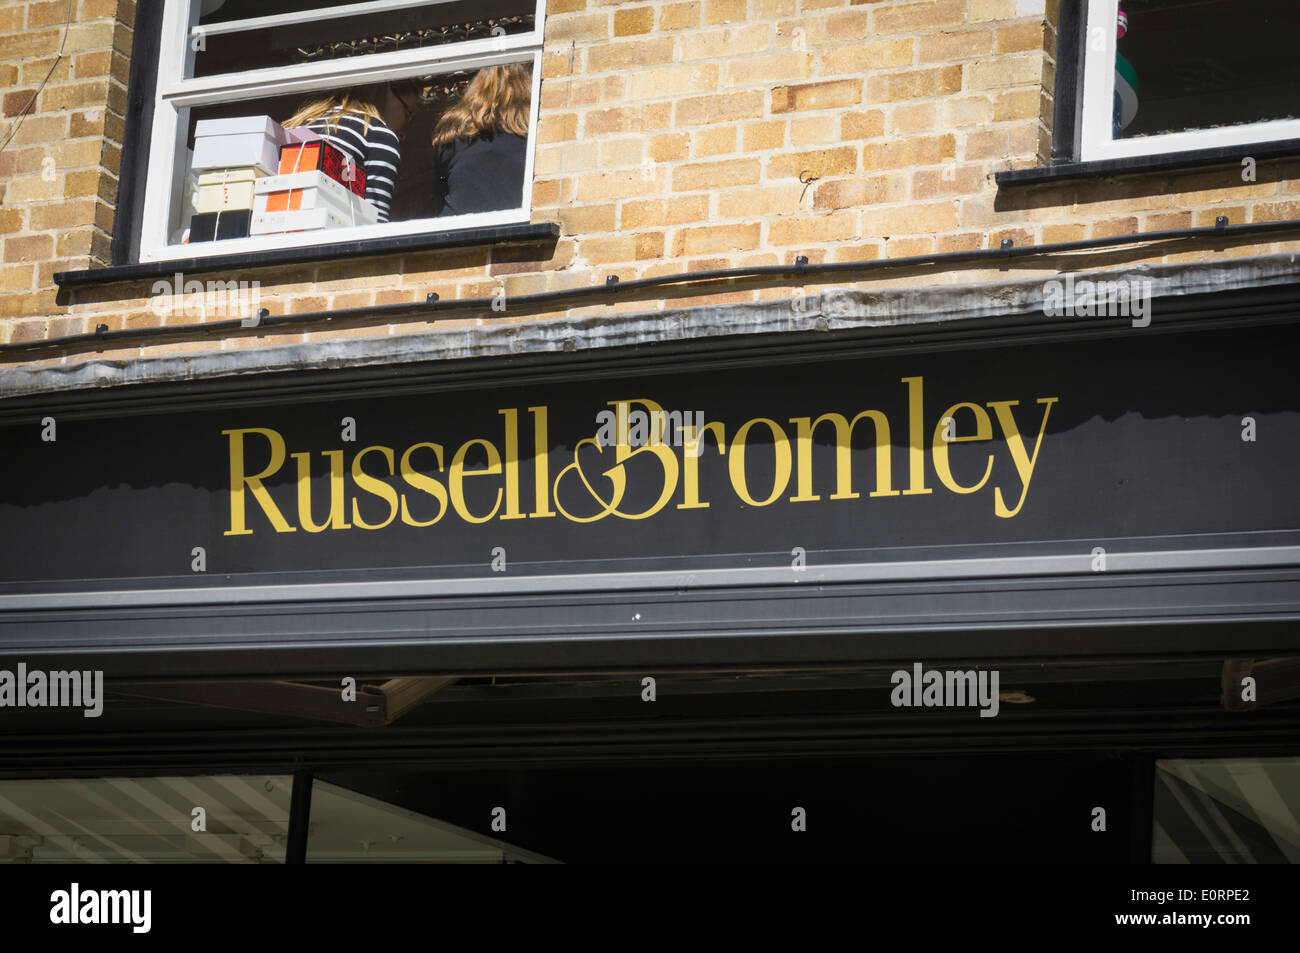 Russell et Bromley, magasin de chaussures, logo, UK Banque D'Images